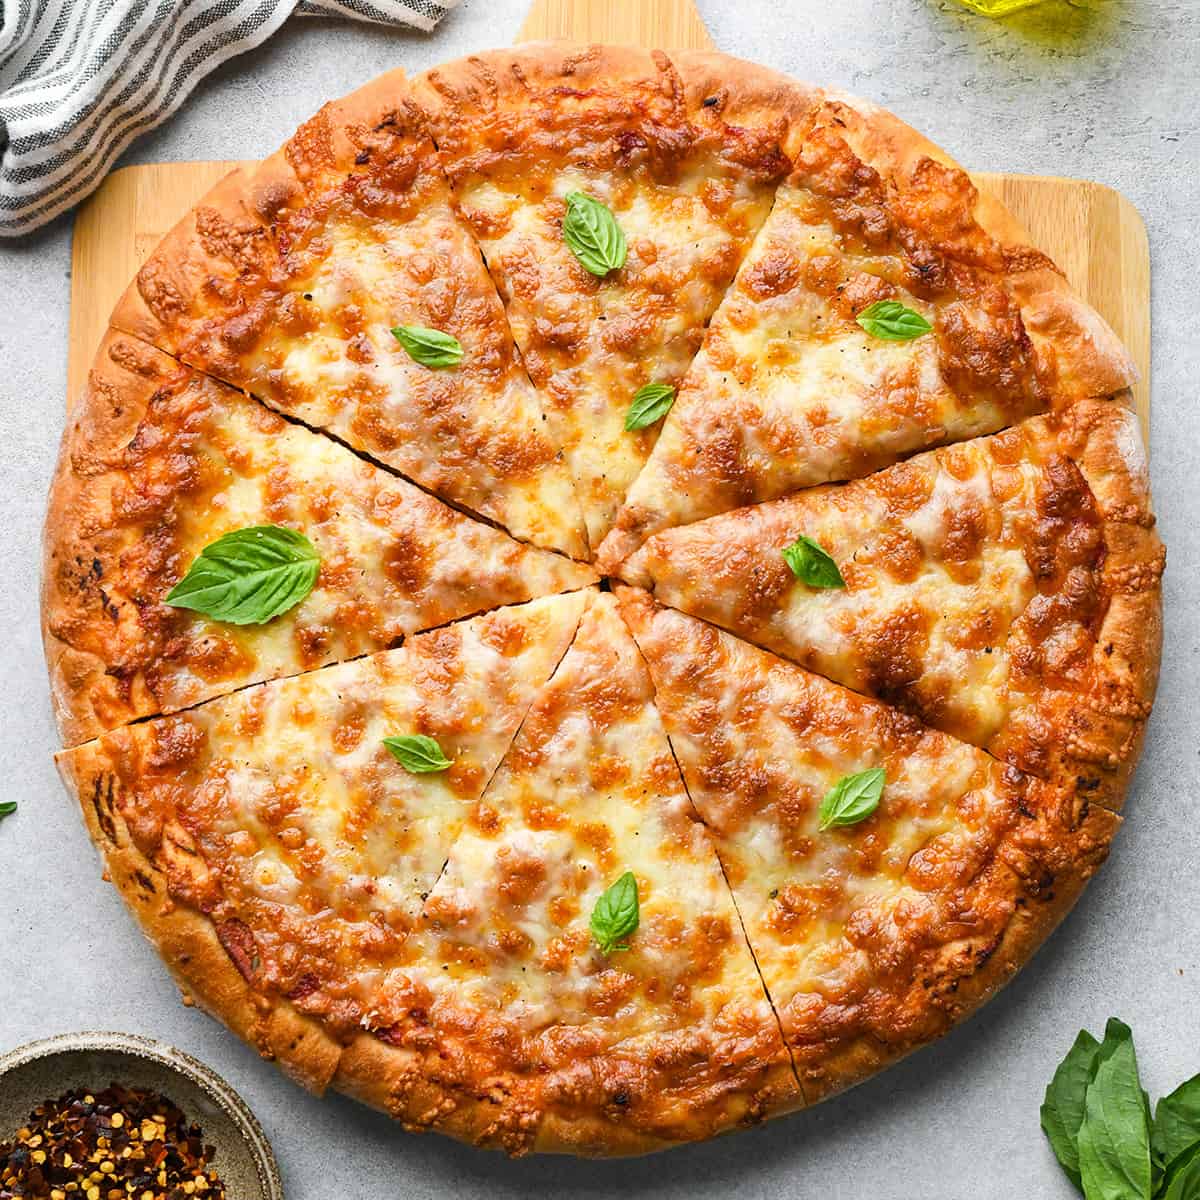 a cheese pizza made with this pizza dough recipe